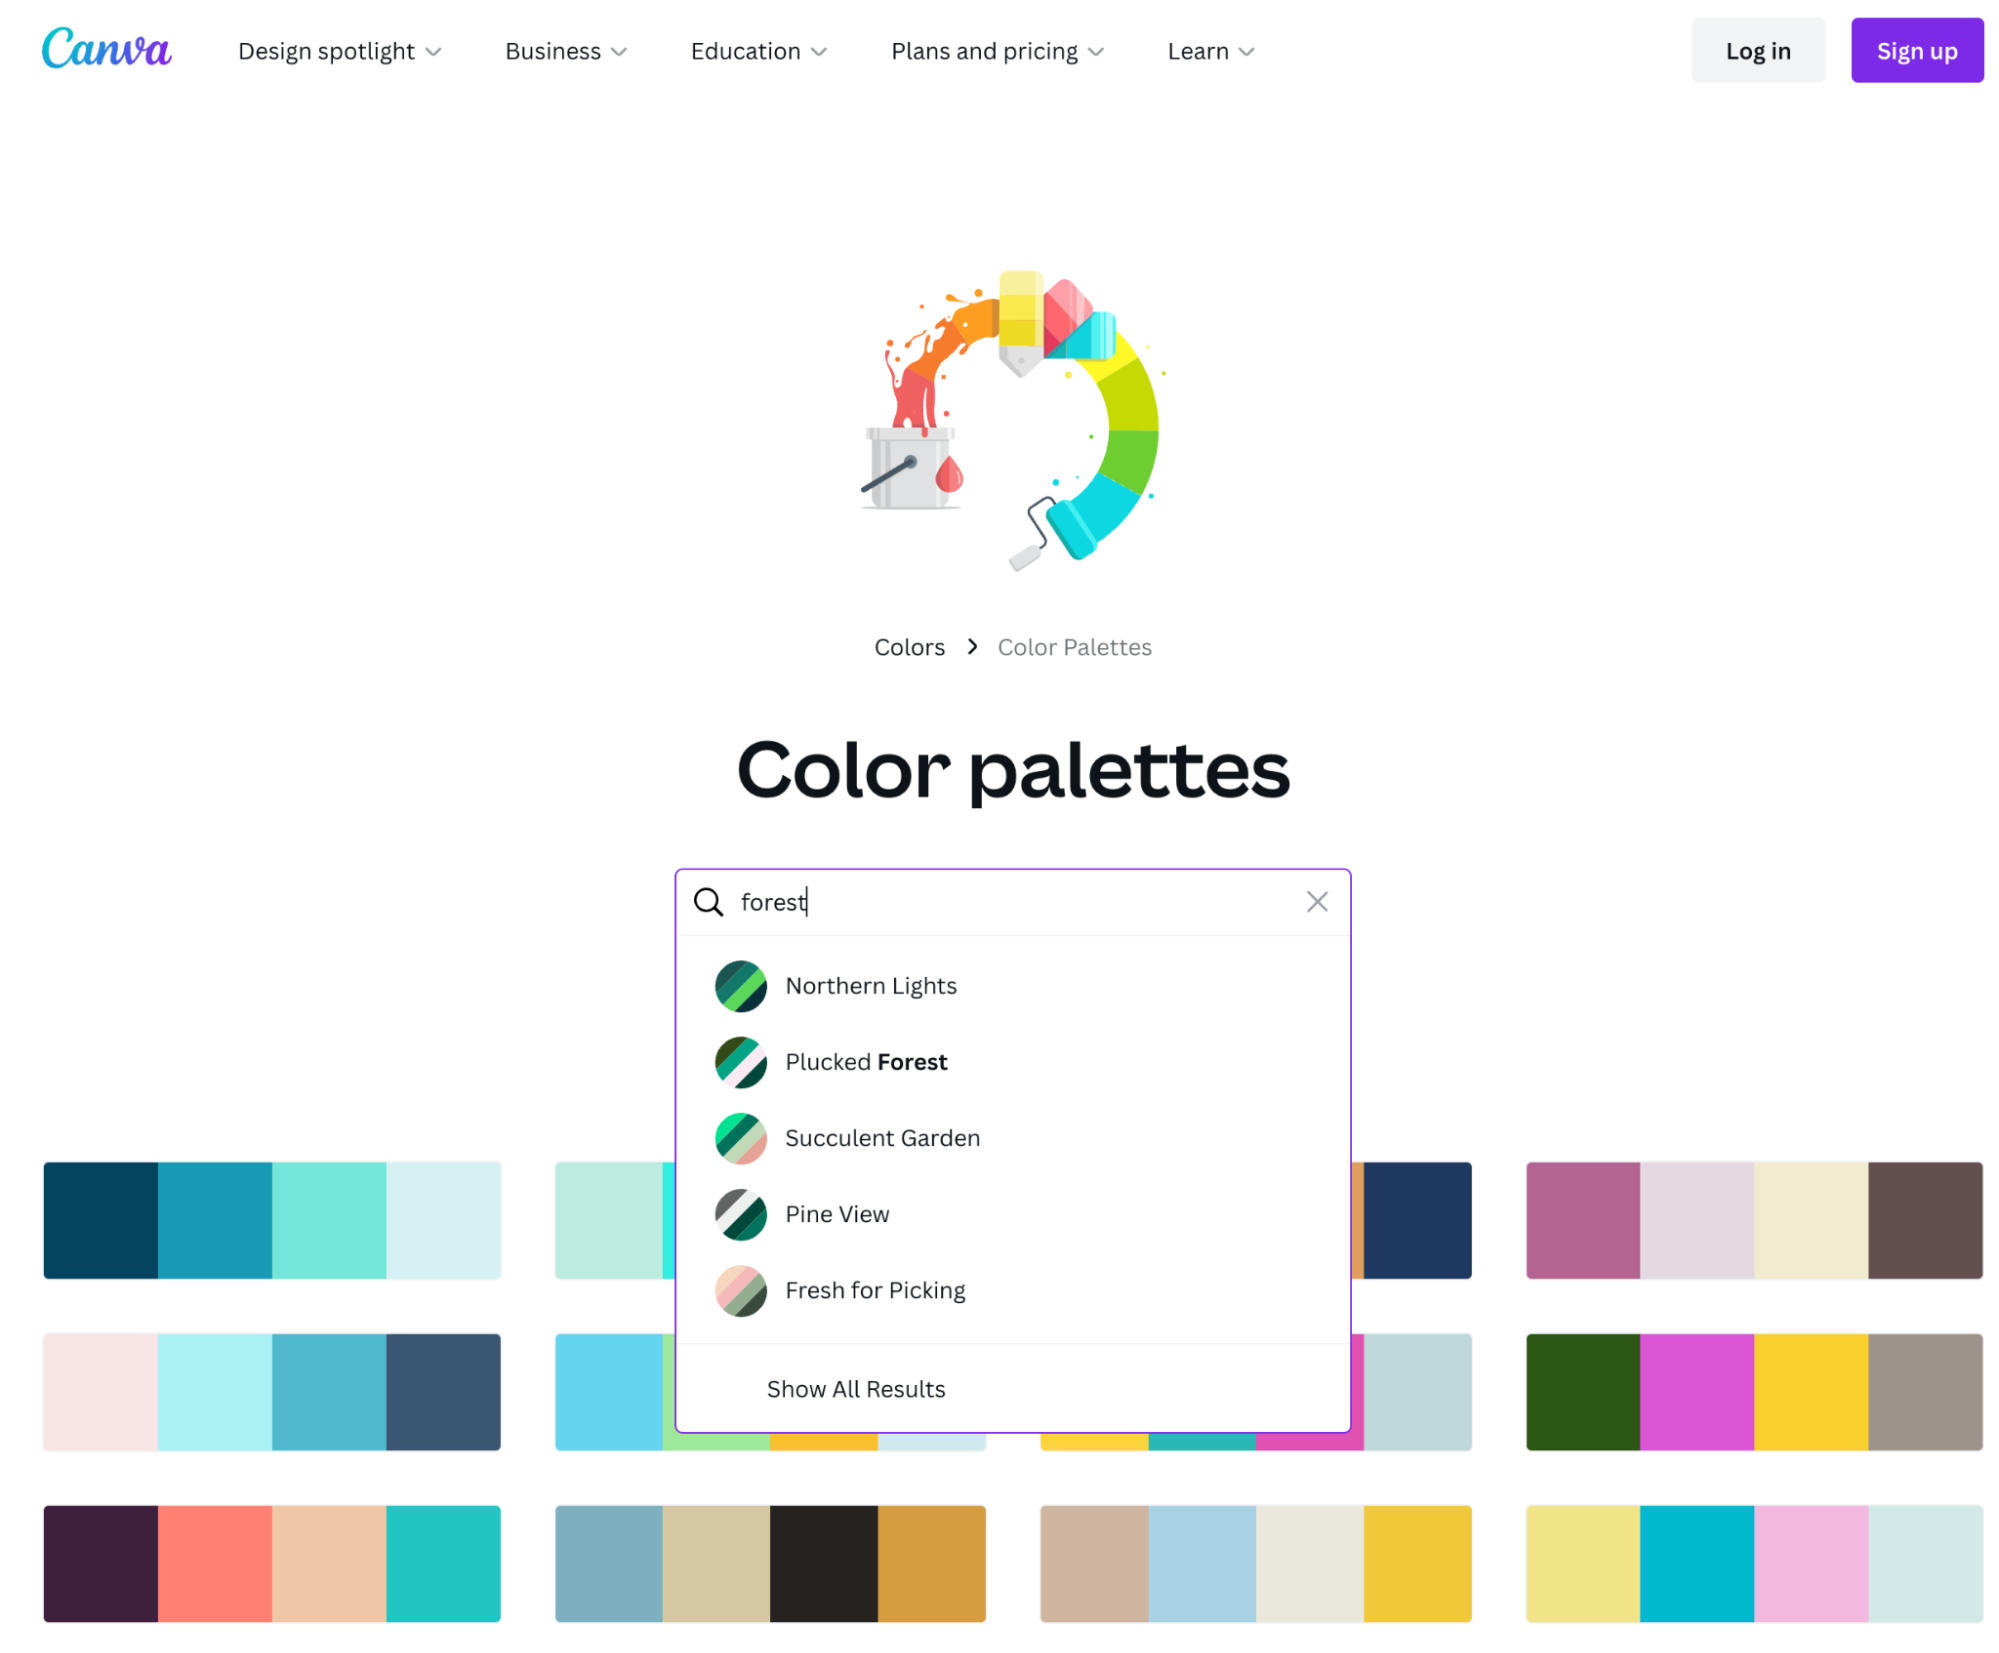 canva color palette generator can help to design your shopify store